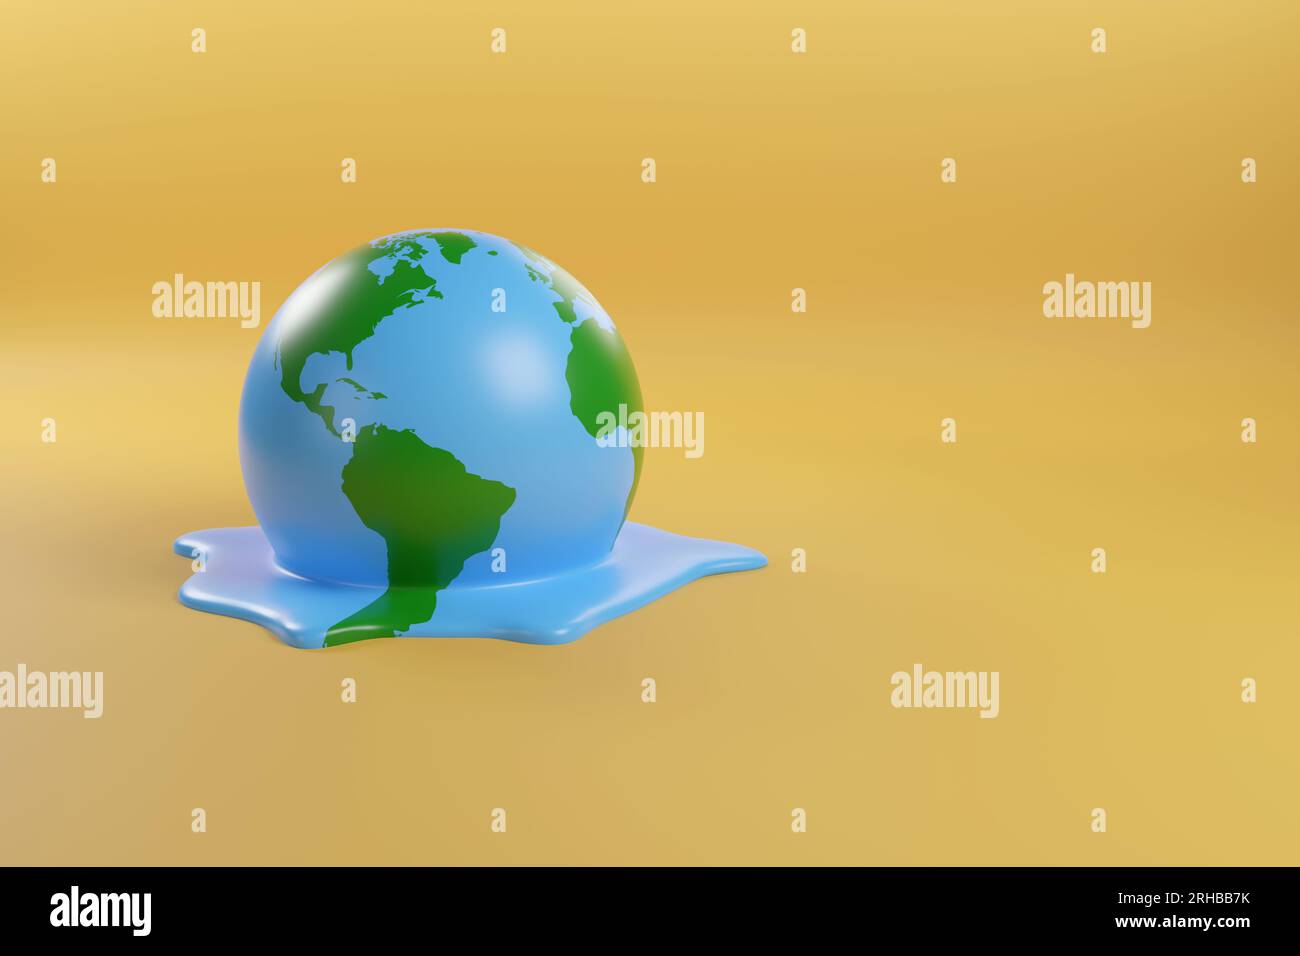 Planet earth melting with copy space. Global warming concept. 3d illustration. Stock Photo